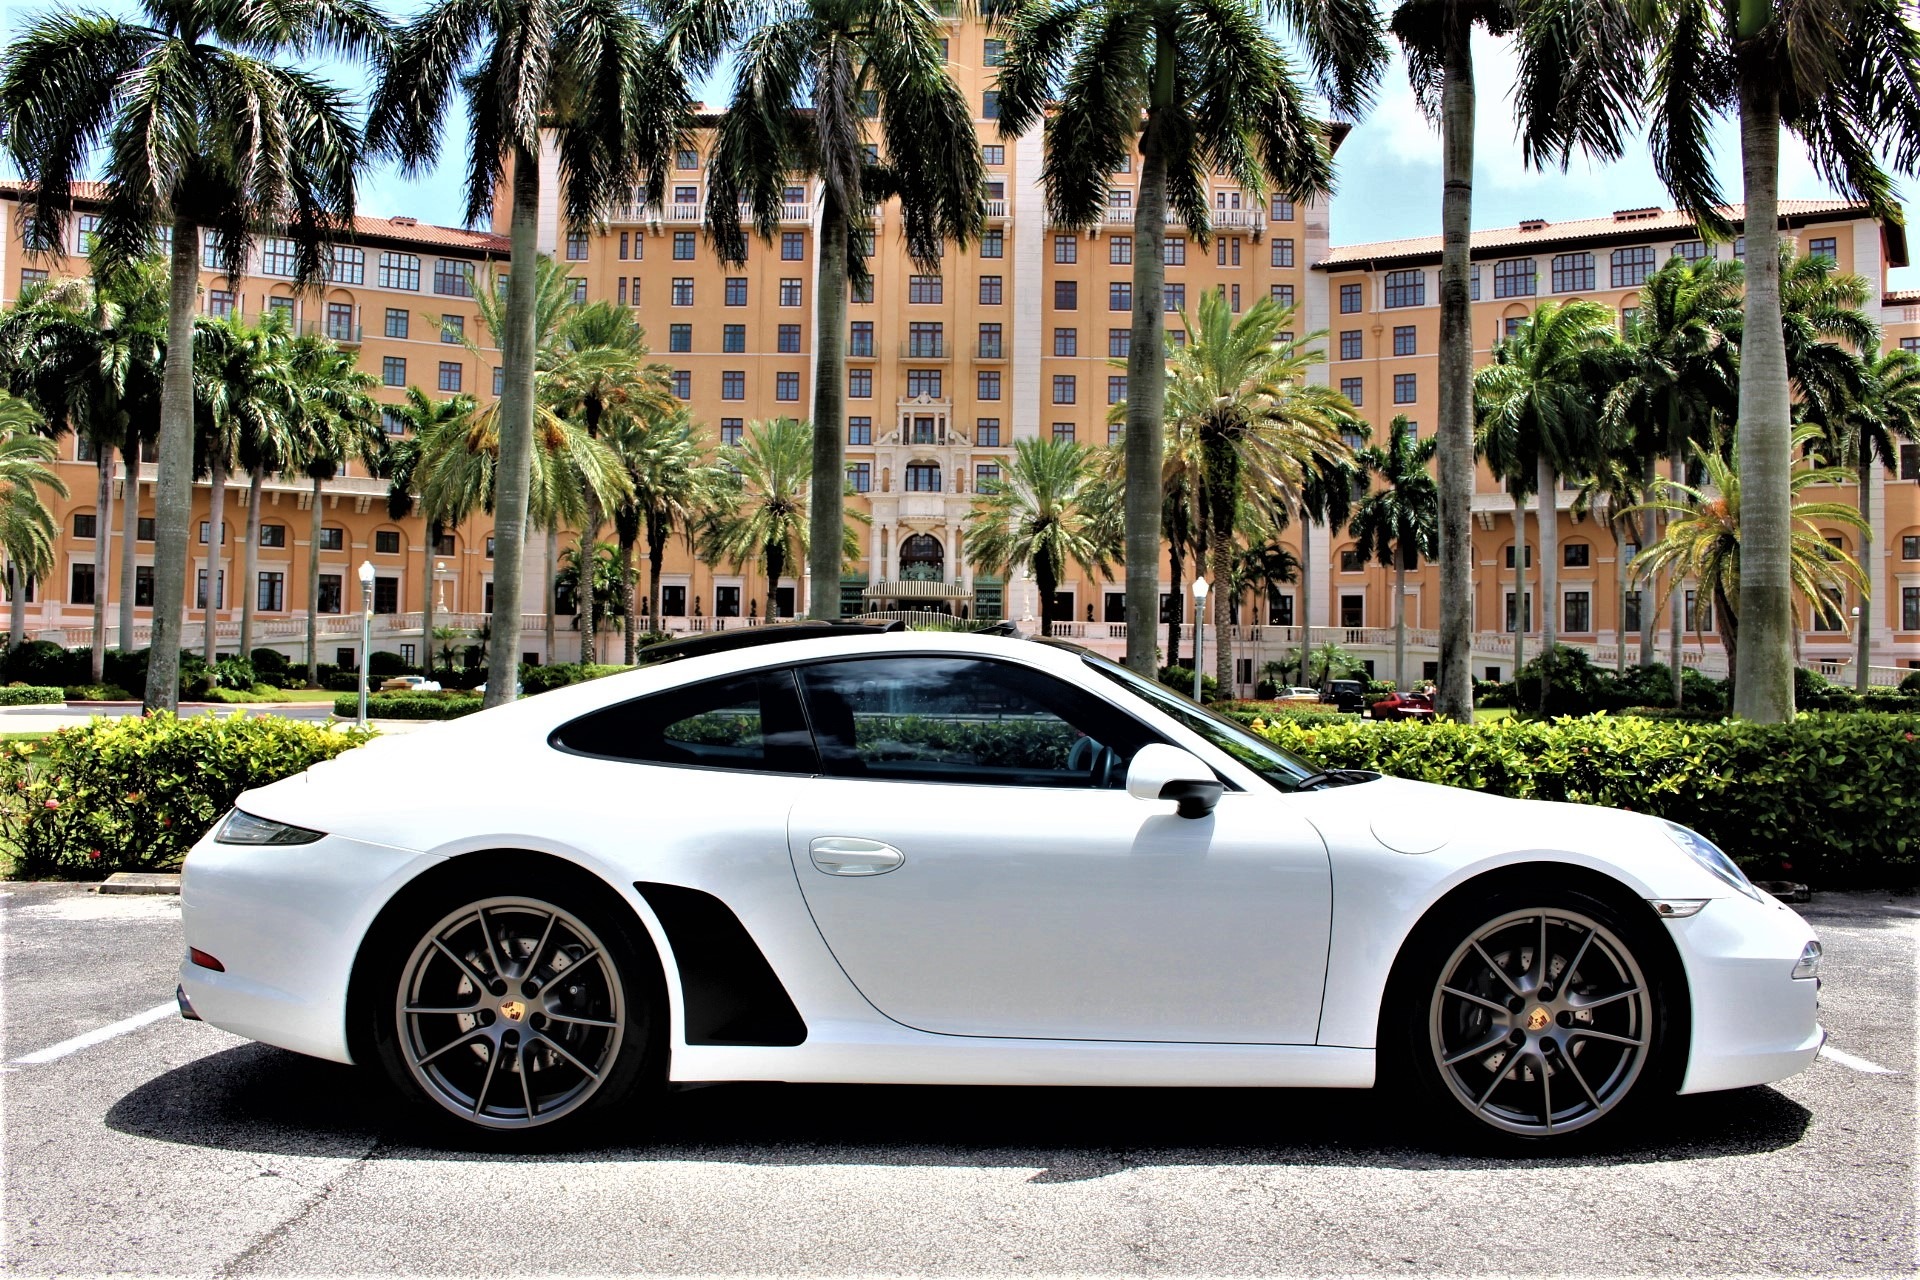 Used 2013 Porsche 911 Carrera for sale Sold at The Gables Sports Cars in Miami FL 33146 1